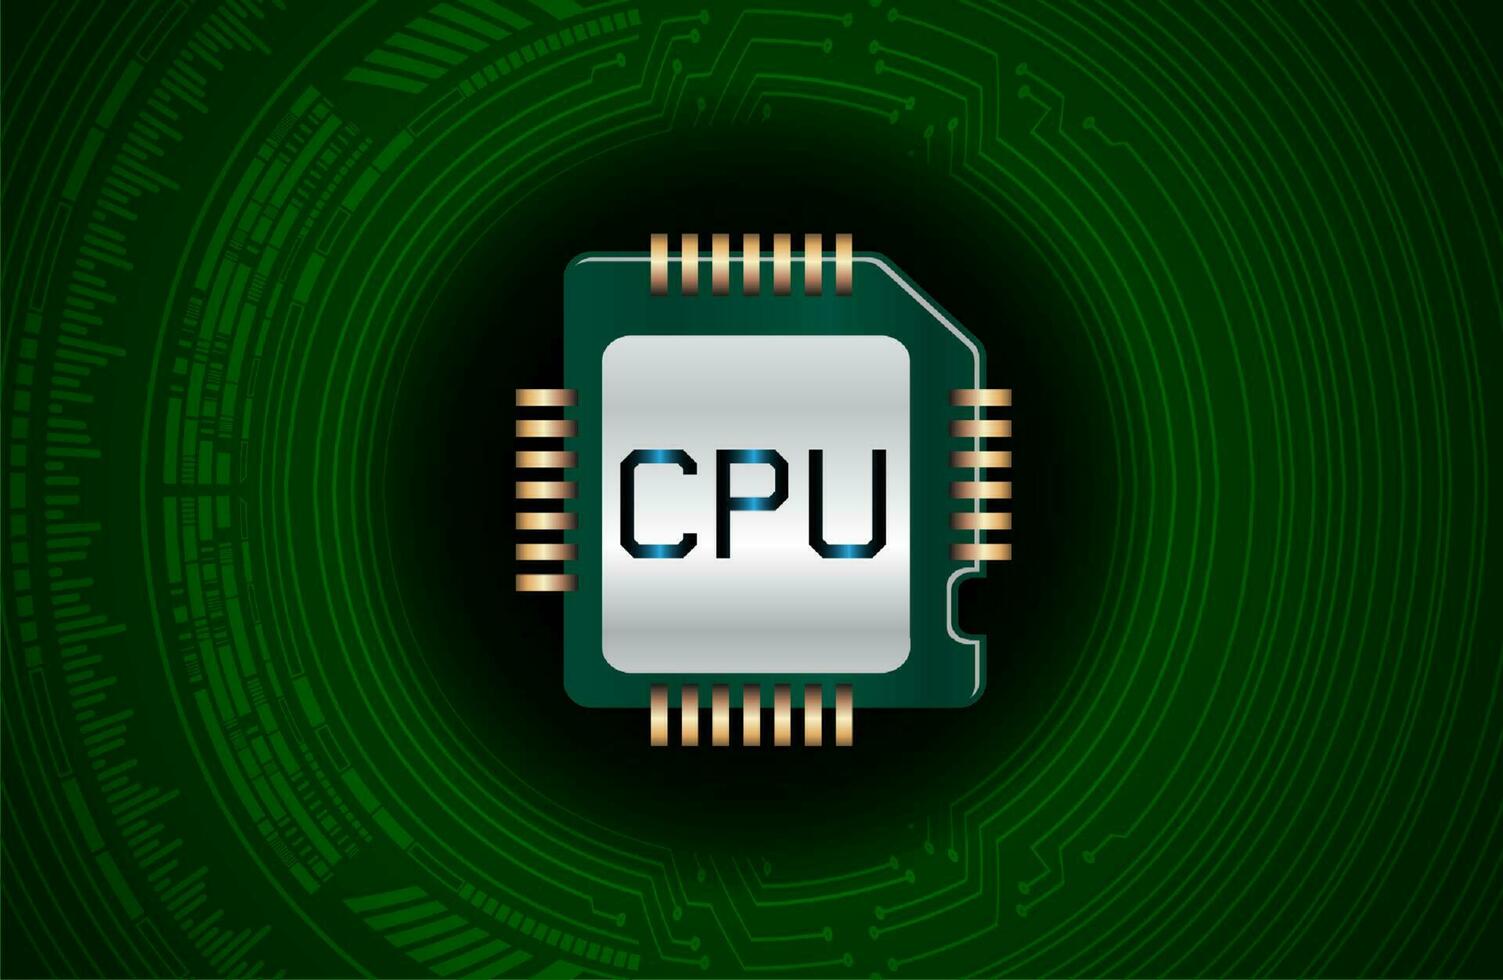 Modern Cybersecurity Technology Background with CPU Chip vector